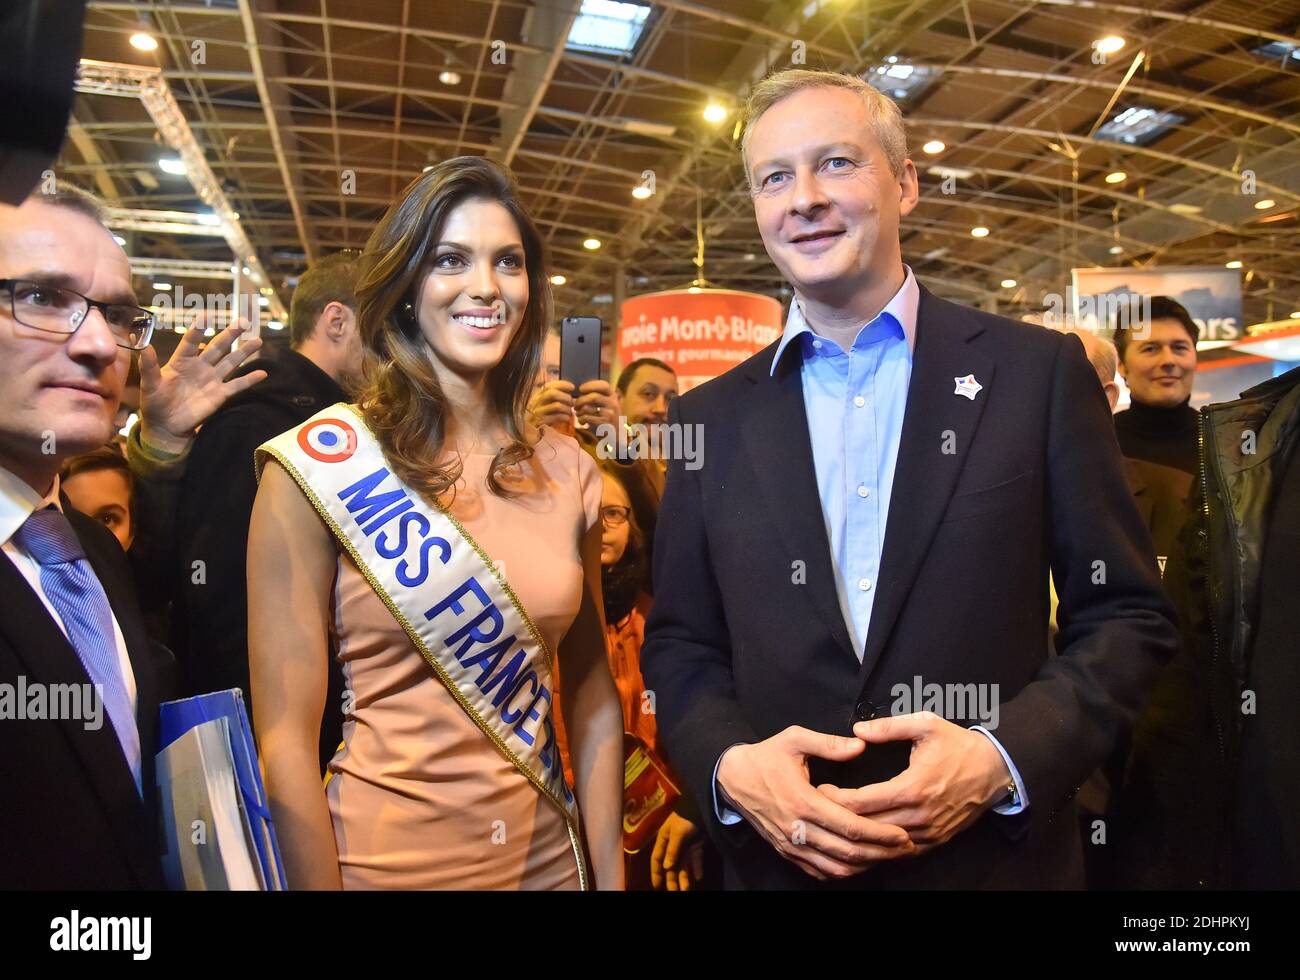 Les Republicains (LR) right-wing party deputy of Eure and former Agriculture Minister Bruno Le Maire meets with Miss France 2016 Iris Mittenaere as he tours the 53rd annual Paris International Agricultural Show at Porte de Versailles in Paris, France on February 29, 2016. Photo by Christian Liewig/ABACAPRESS.COM Stock Photo